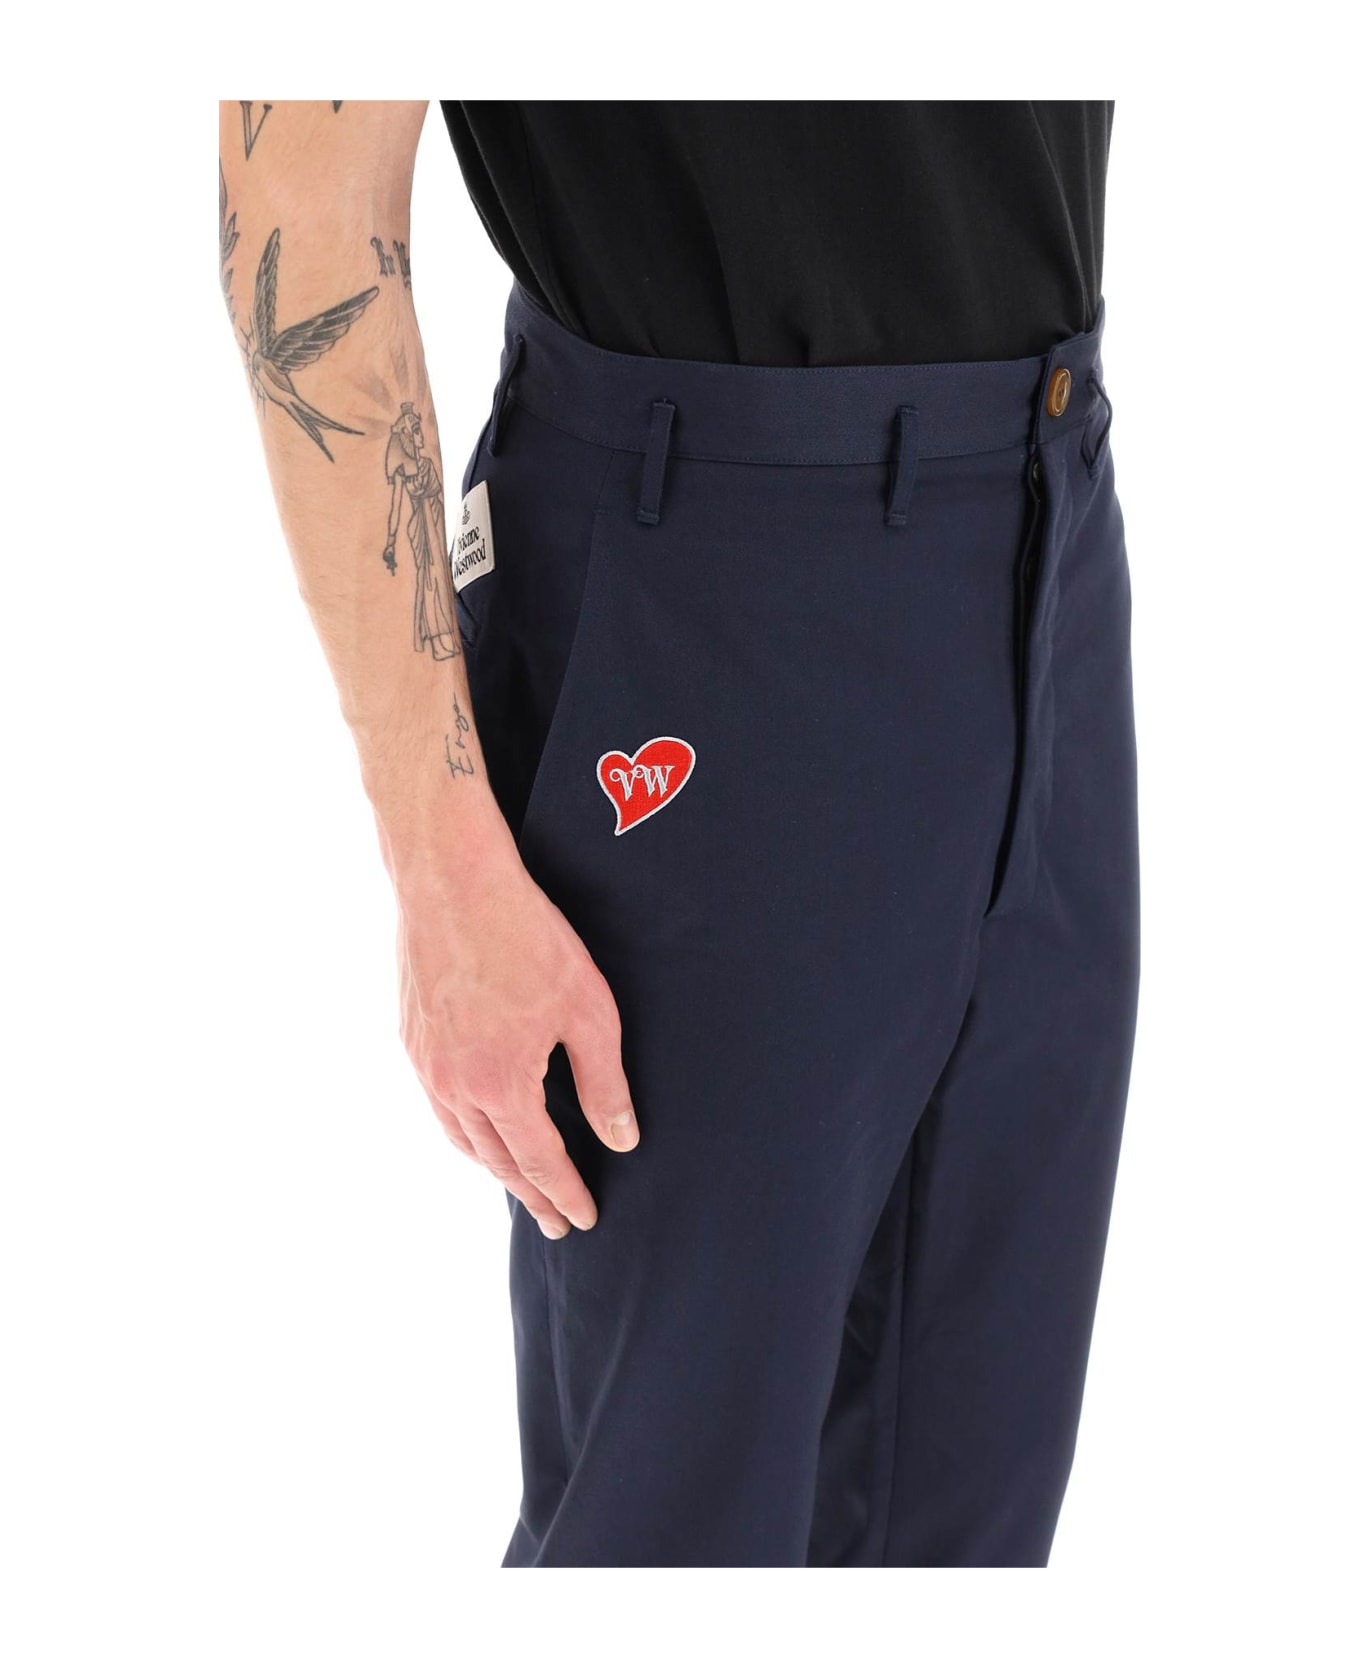 Vivienne Westwood Cropped Cruise Pants Featuring Embroidered Heart-shaped Logo - NAVY (Blue)